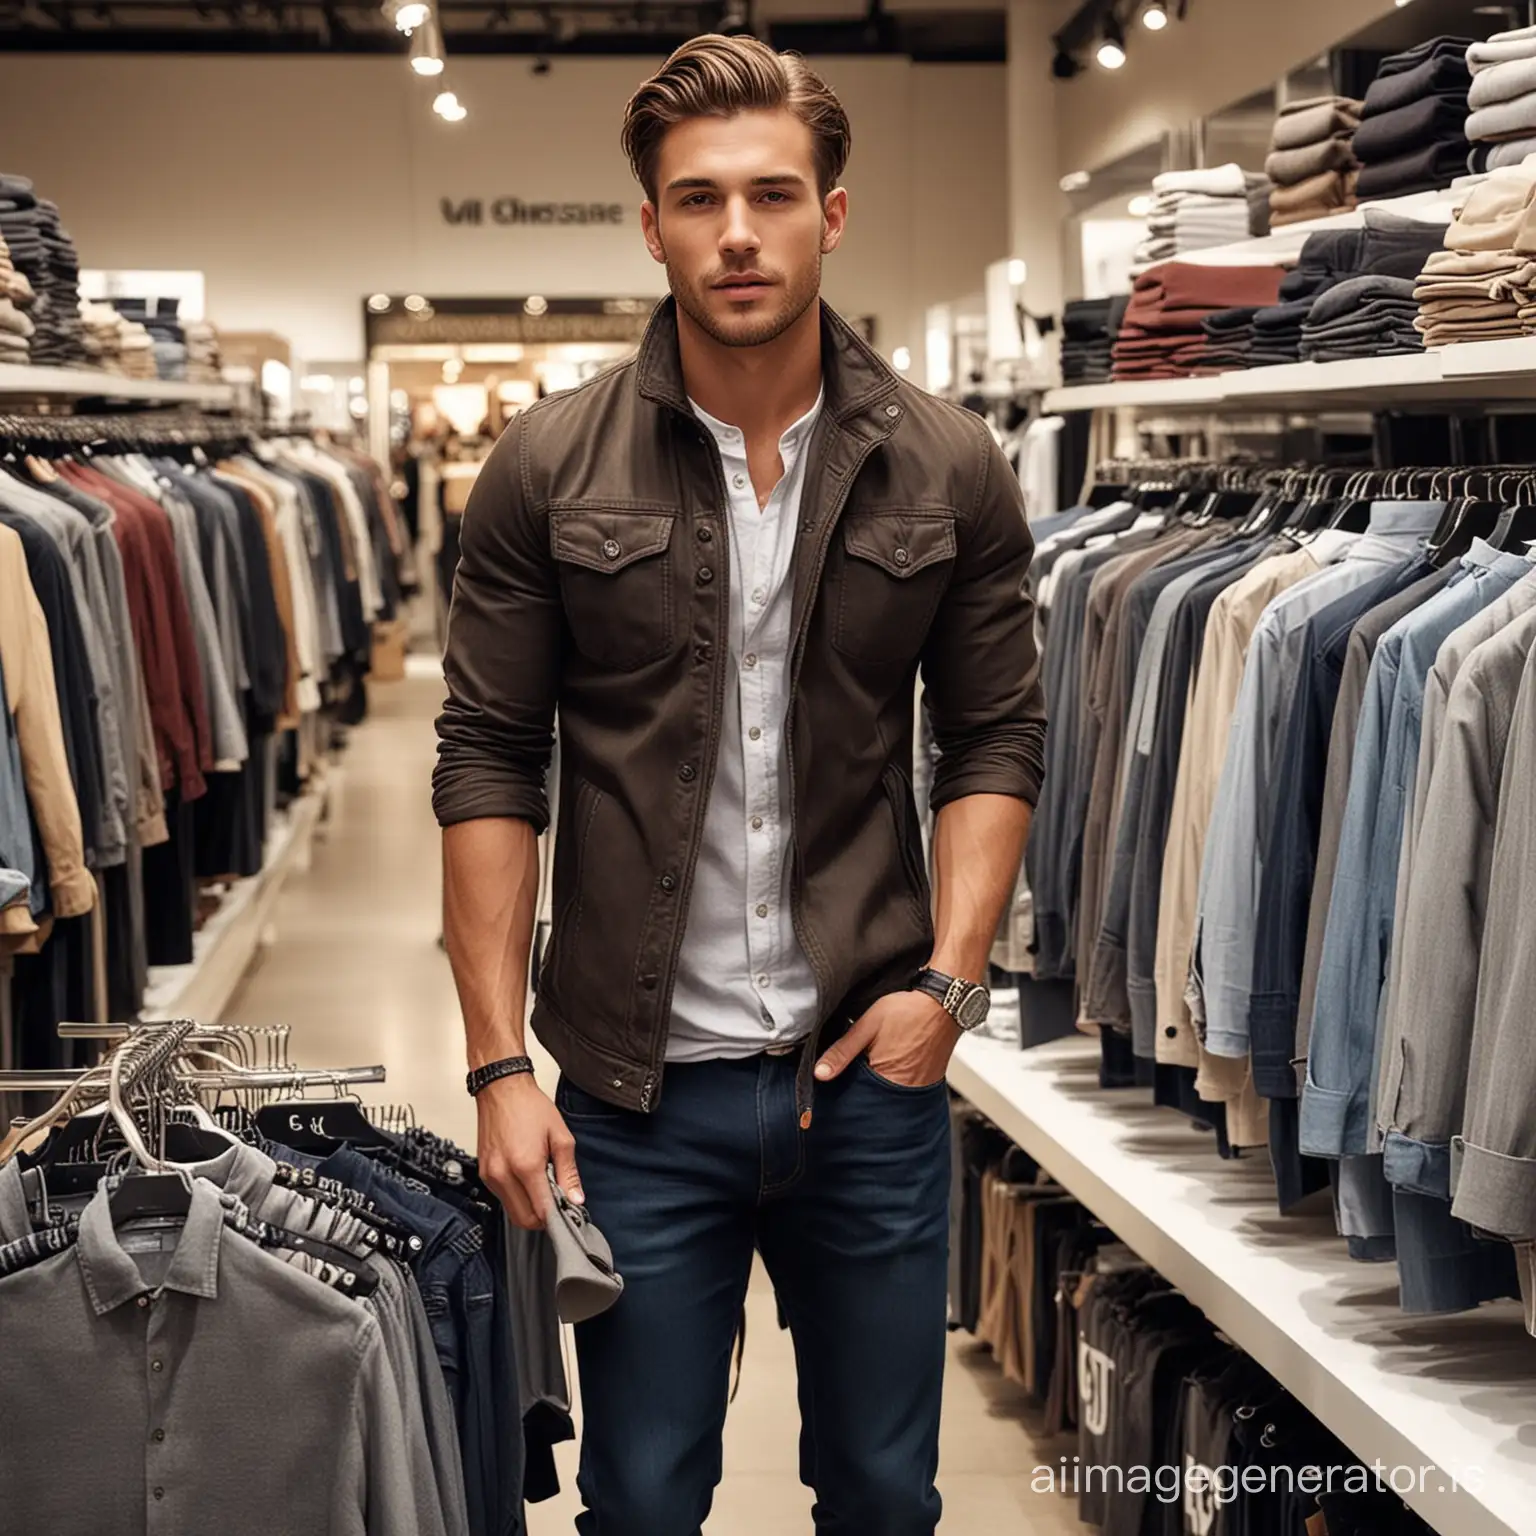 I want to see what the ideal shopping experience with men all races inside clothing store photos for a magazine cover that are satisfied emotion